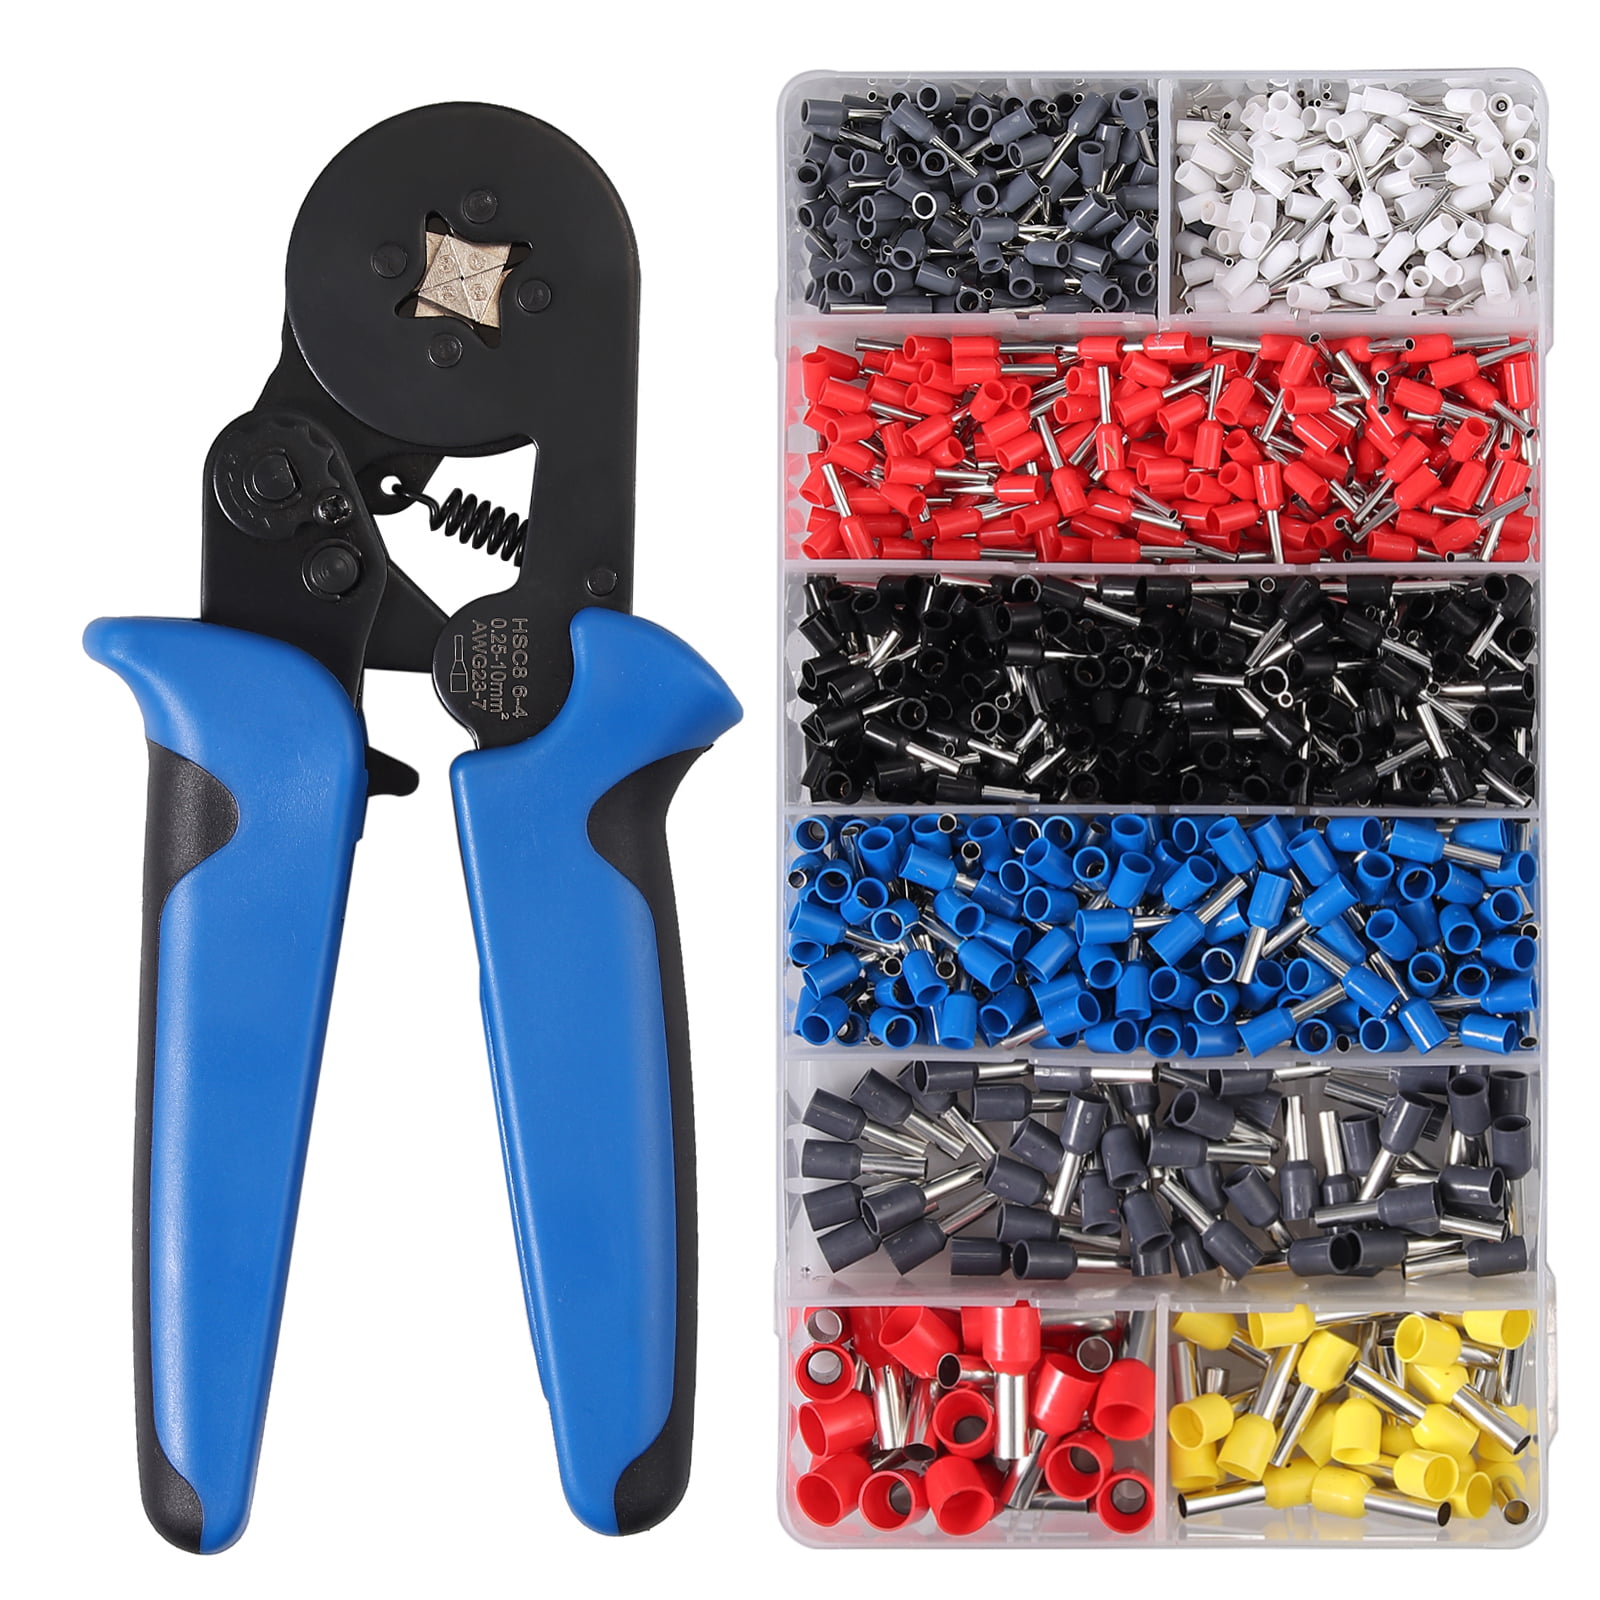 Ferrule Crimper Crimping Plier Tools Kit 1200x Wire Terminal Connector 0.25-6mm² 